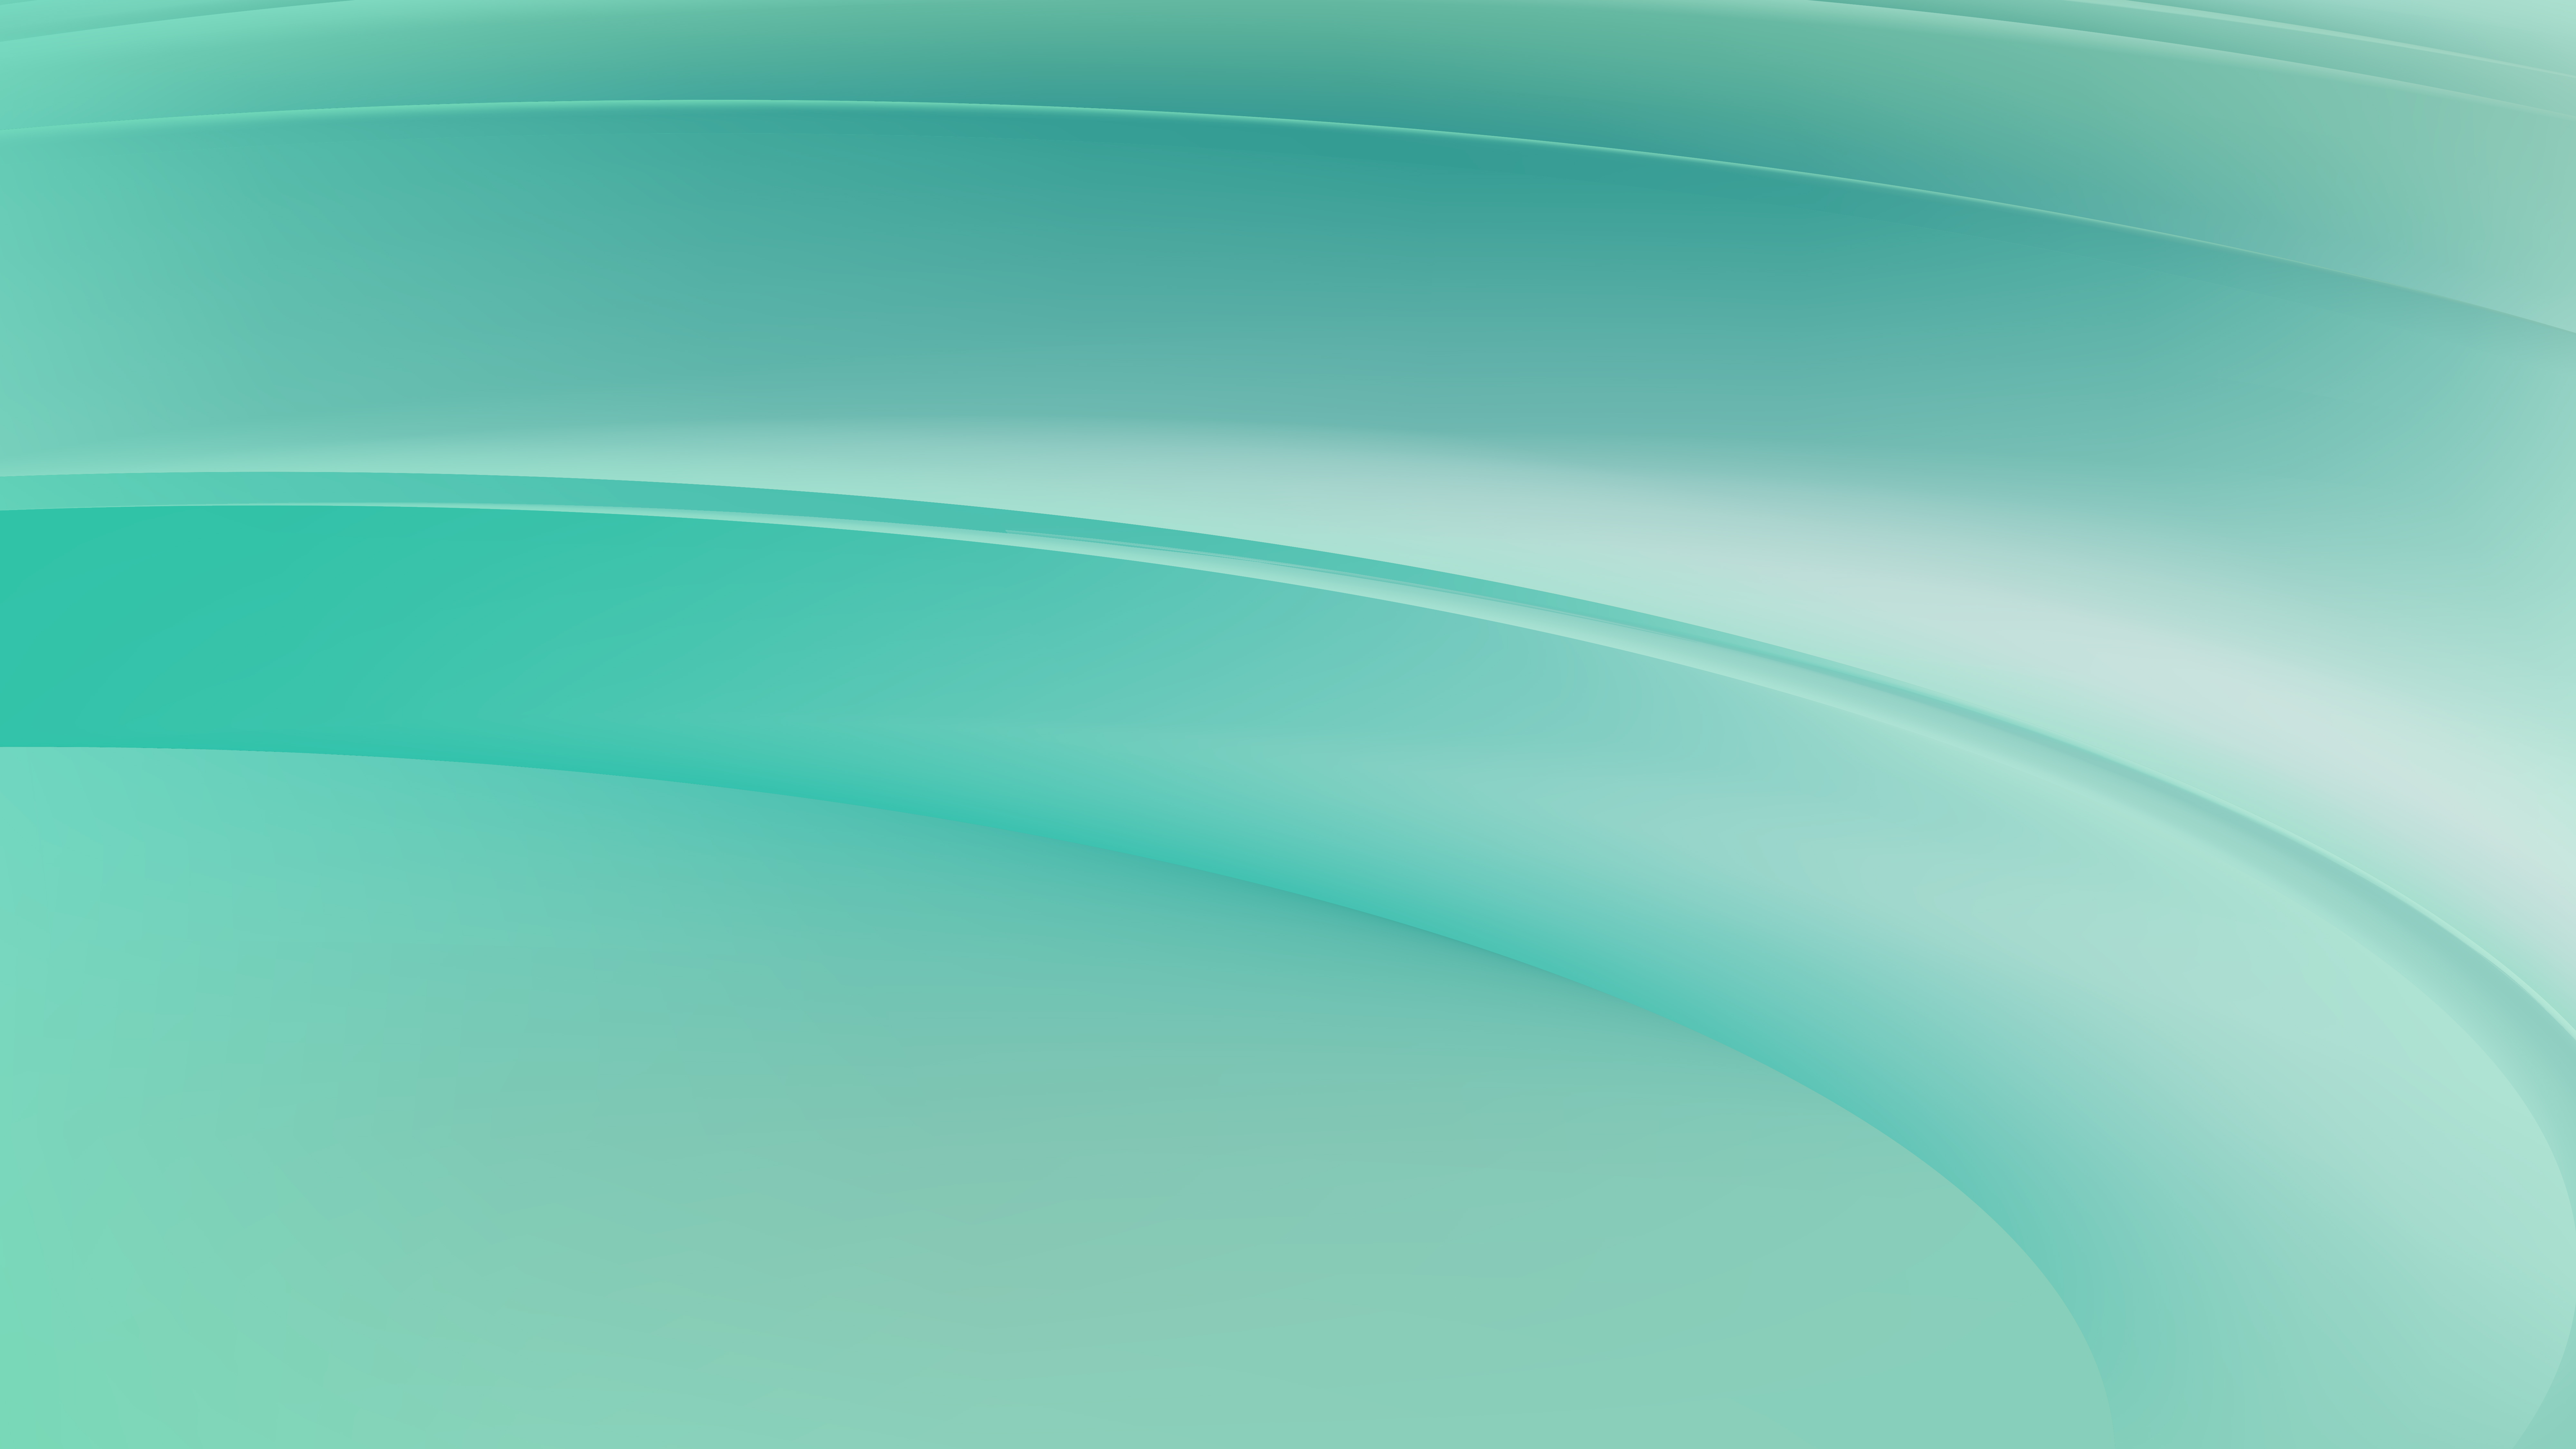 Abstract Mint Green Wavy Background